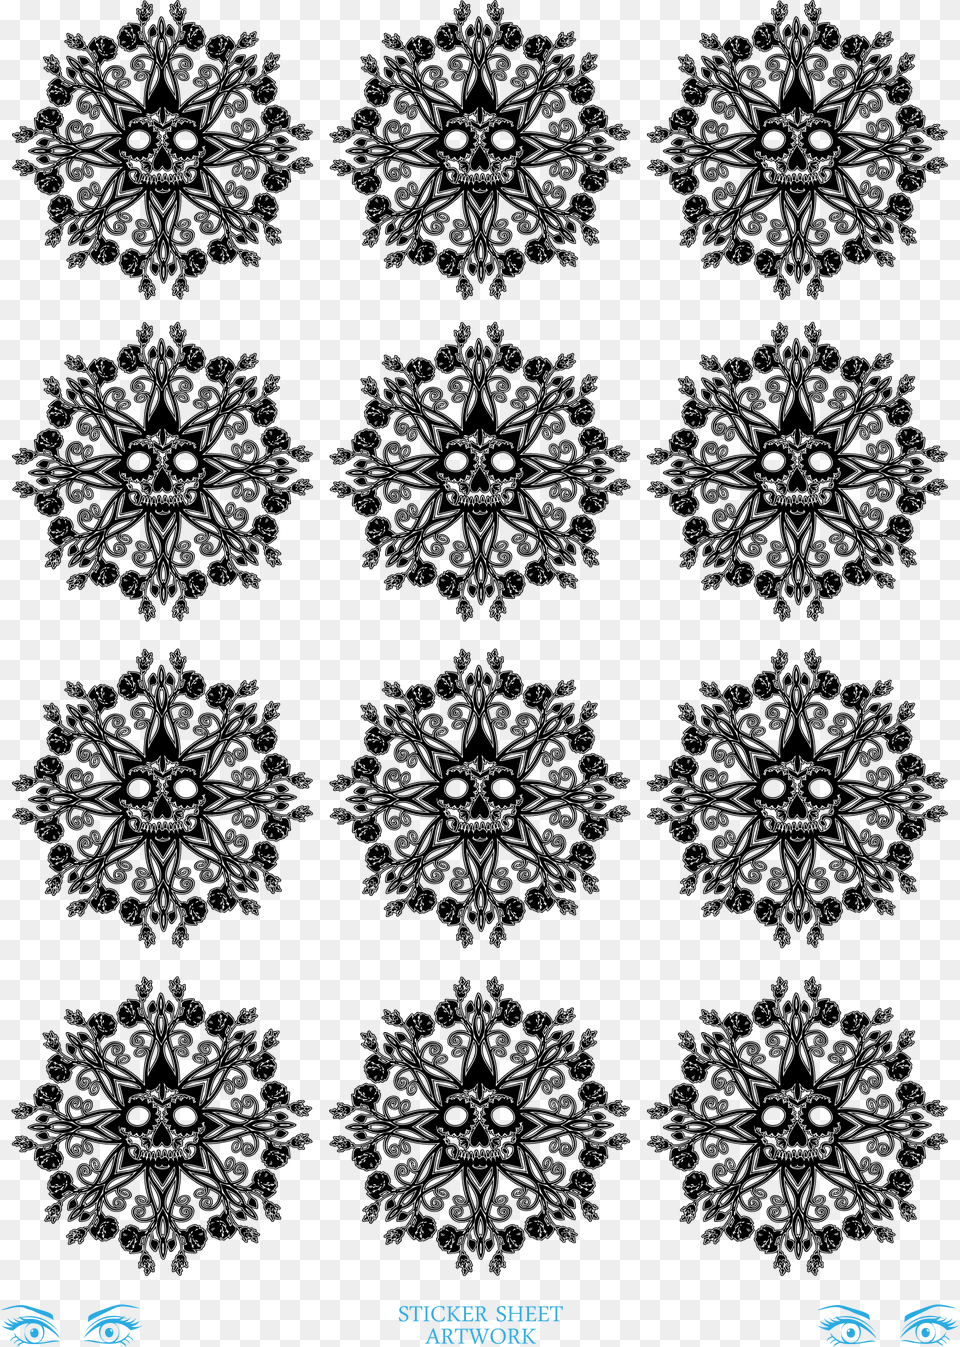 This Icons Design Of Skull Floral Black Free Png Download